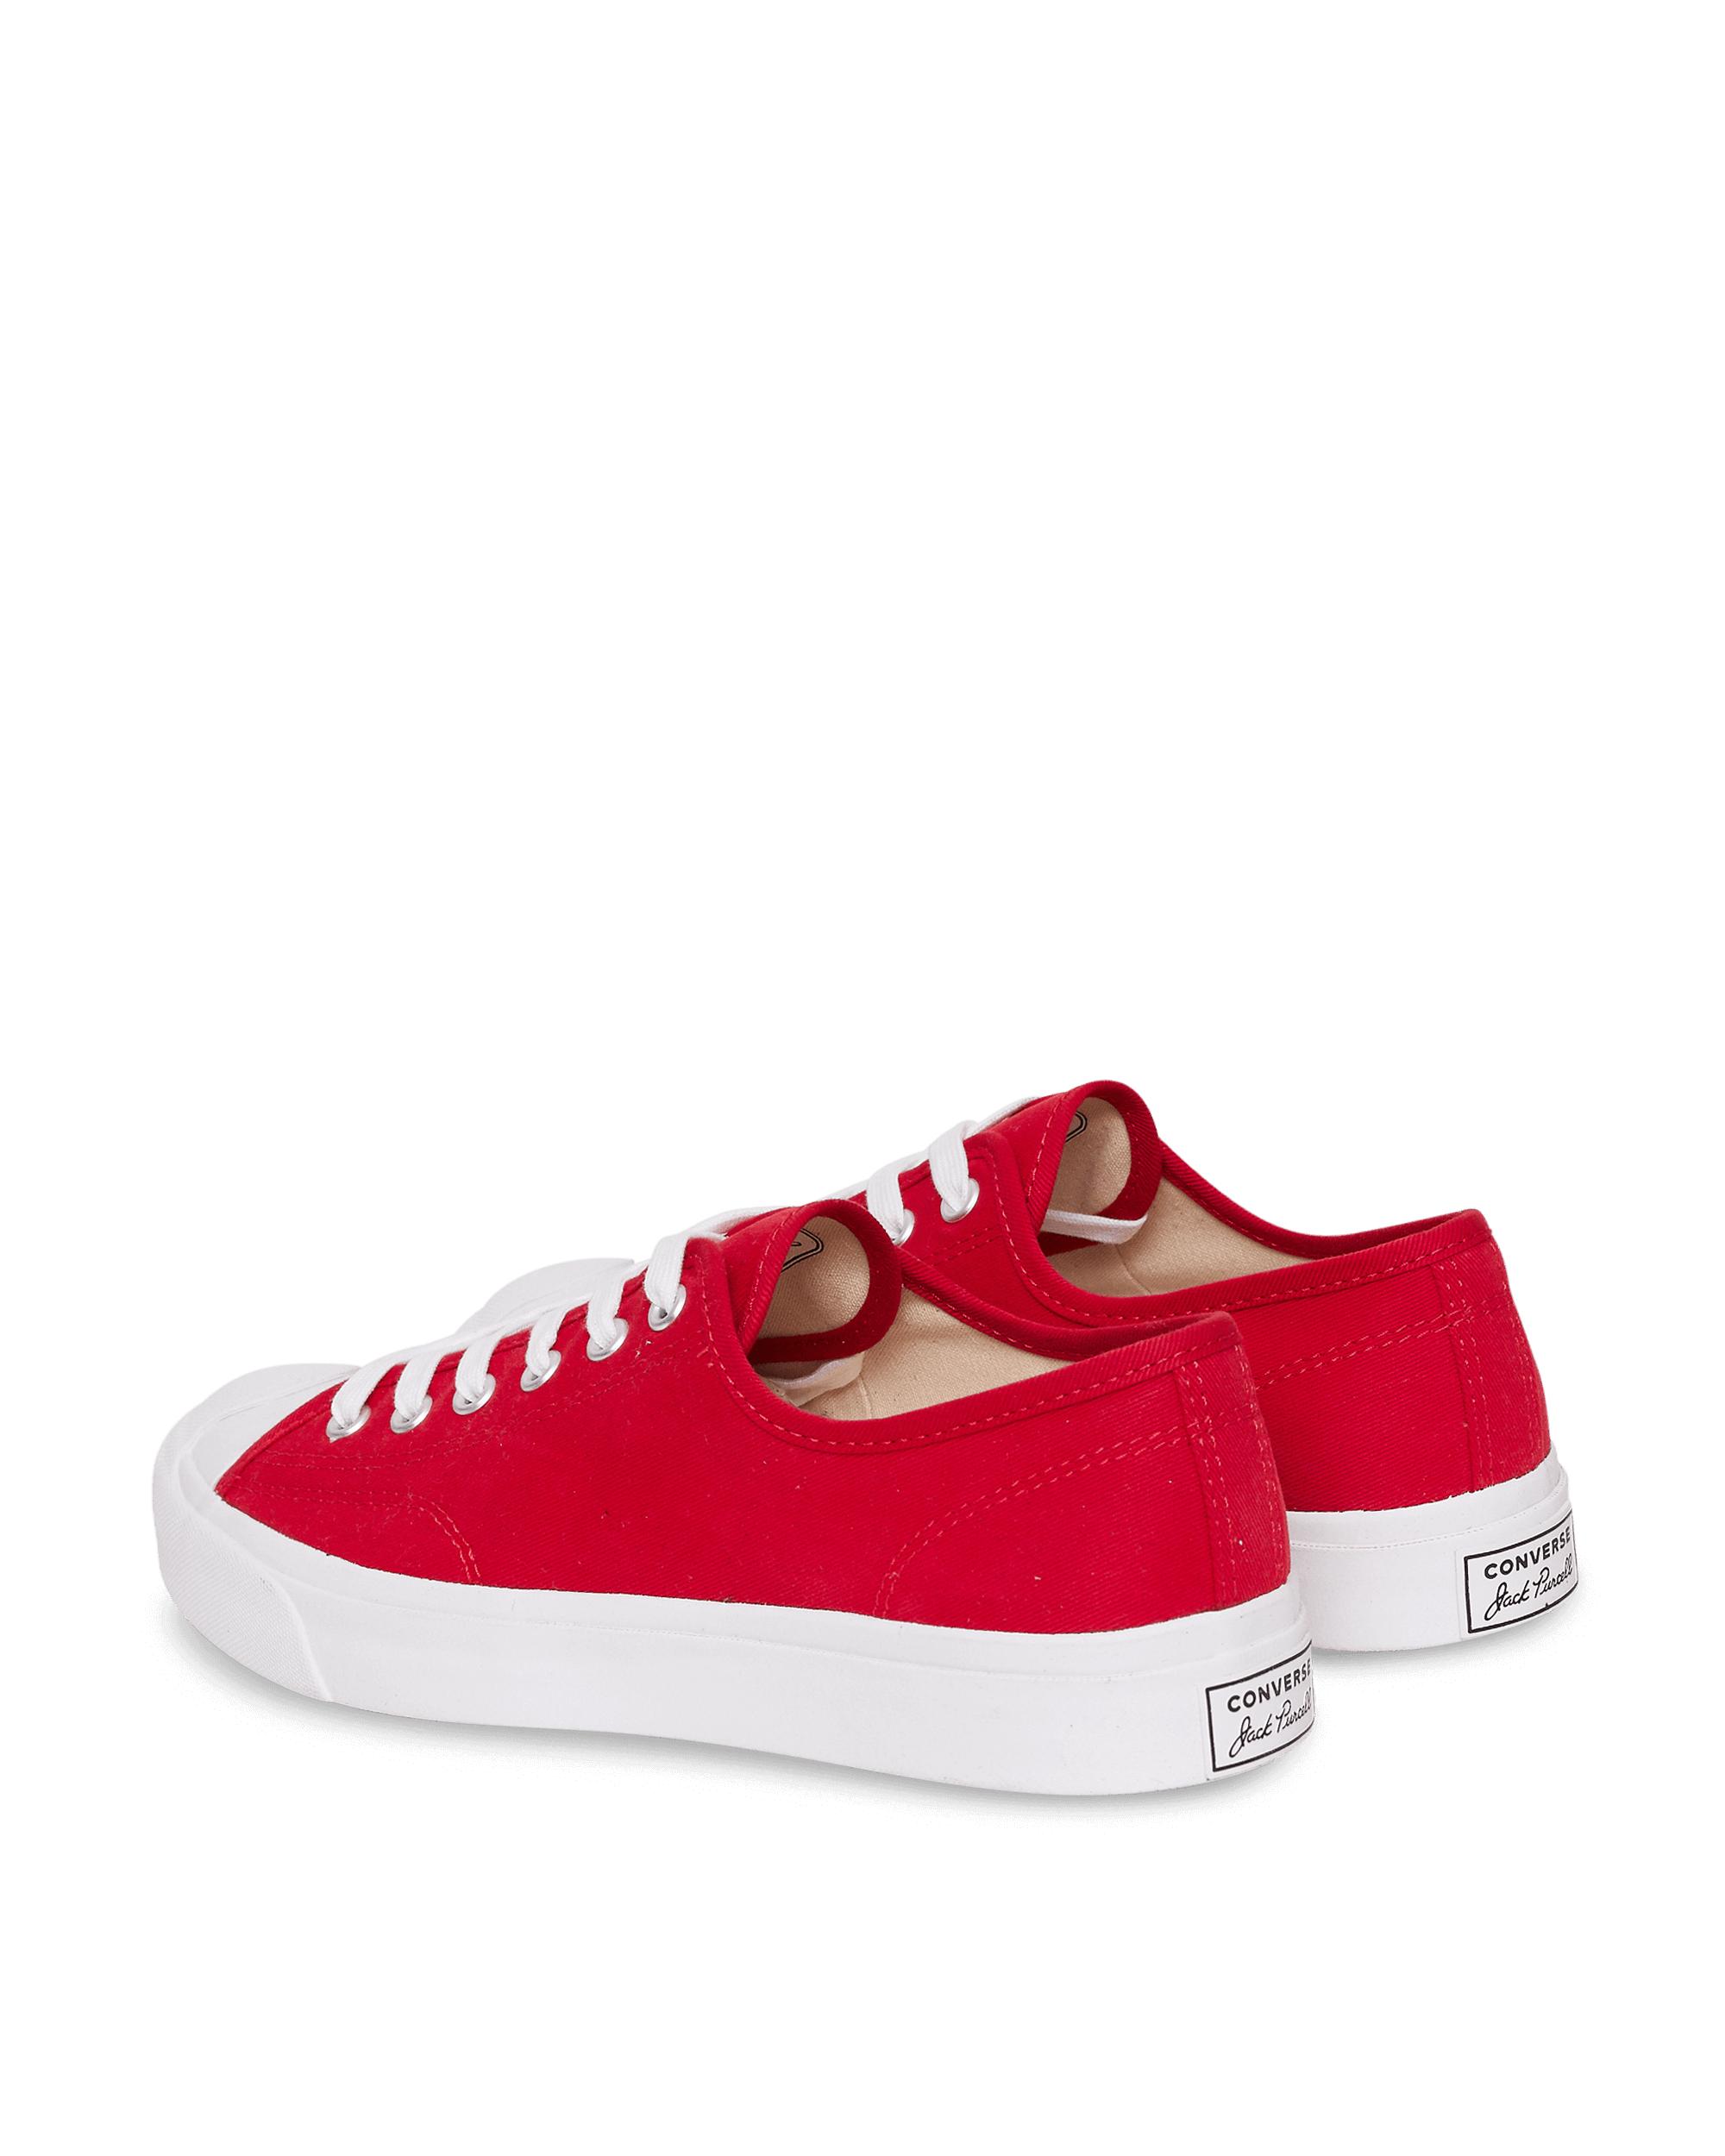 Converse Jack Purcell Sneakers in Red for | Lyst